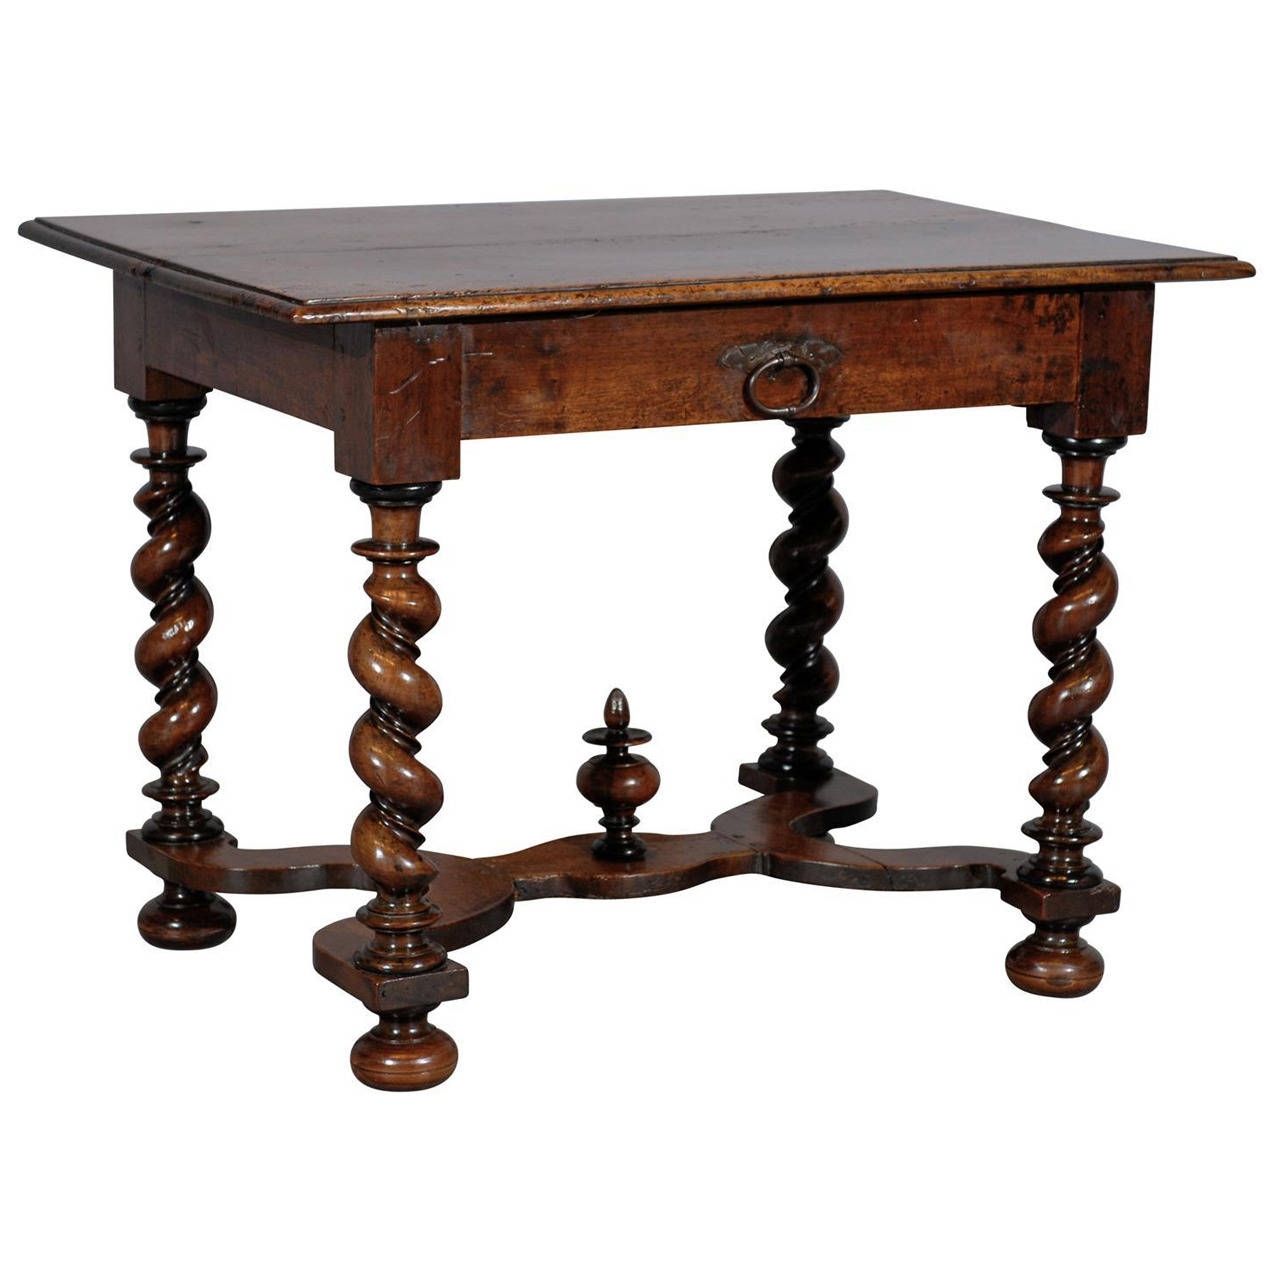 18th Century French Louis Xiii Style Walnut Table With Barley Twist Throughout Barley Twist Coffee Tables (View 20 of 30)